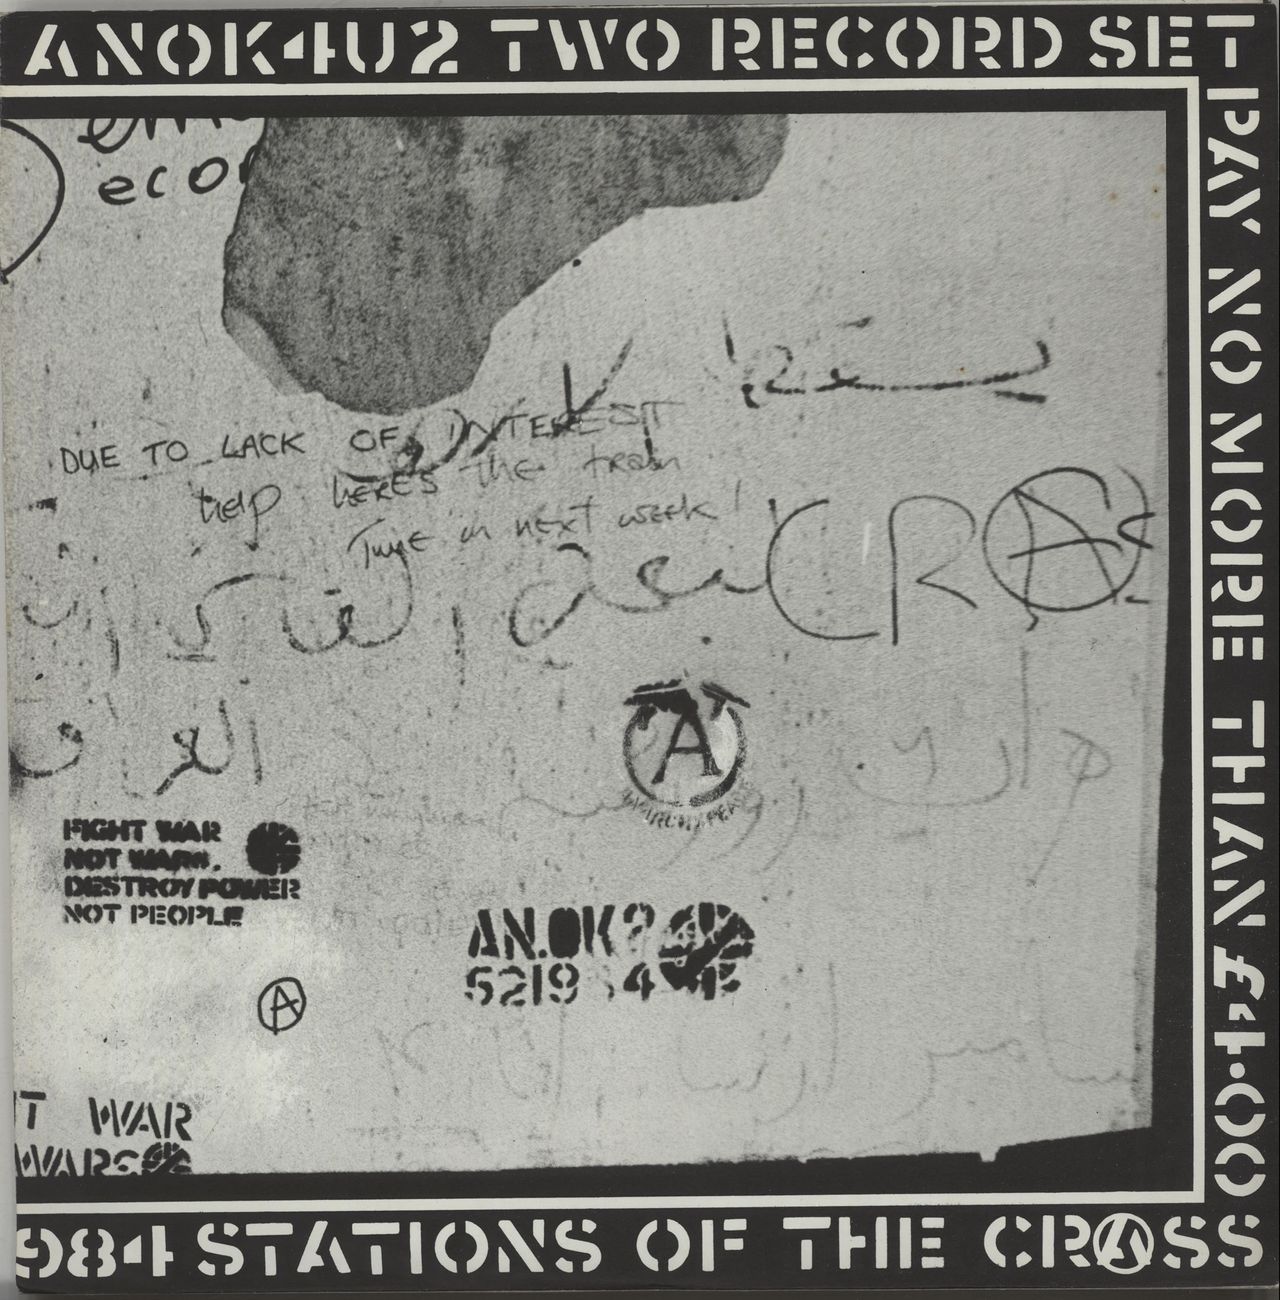 crass-stations-of-the-crass-2nd-4-00-uk-2-lp-vinyl-record-double-521984-659383_1280x1300.jpg